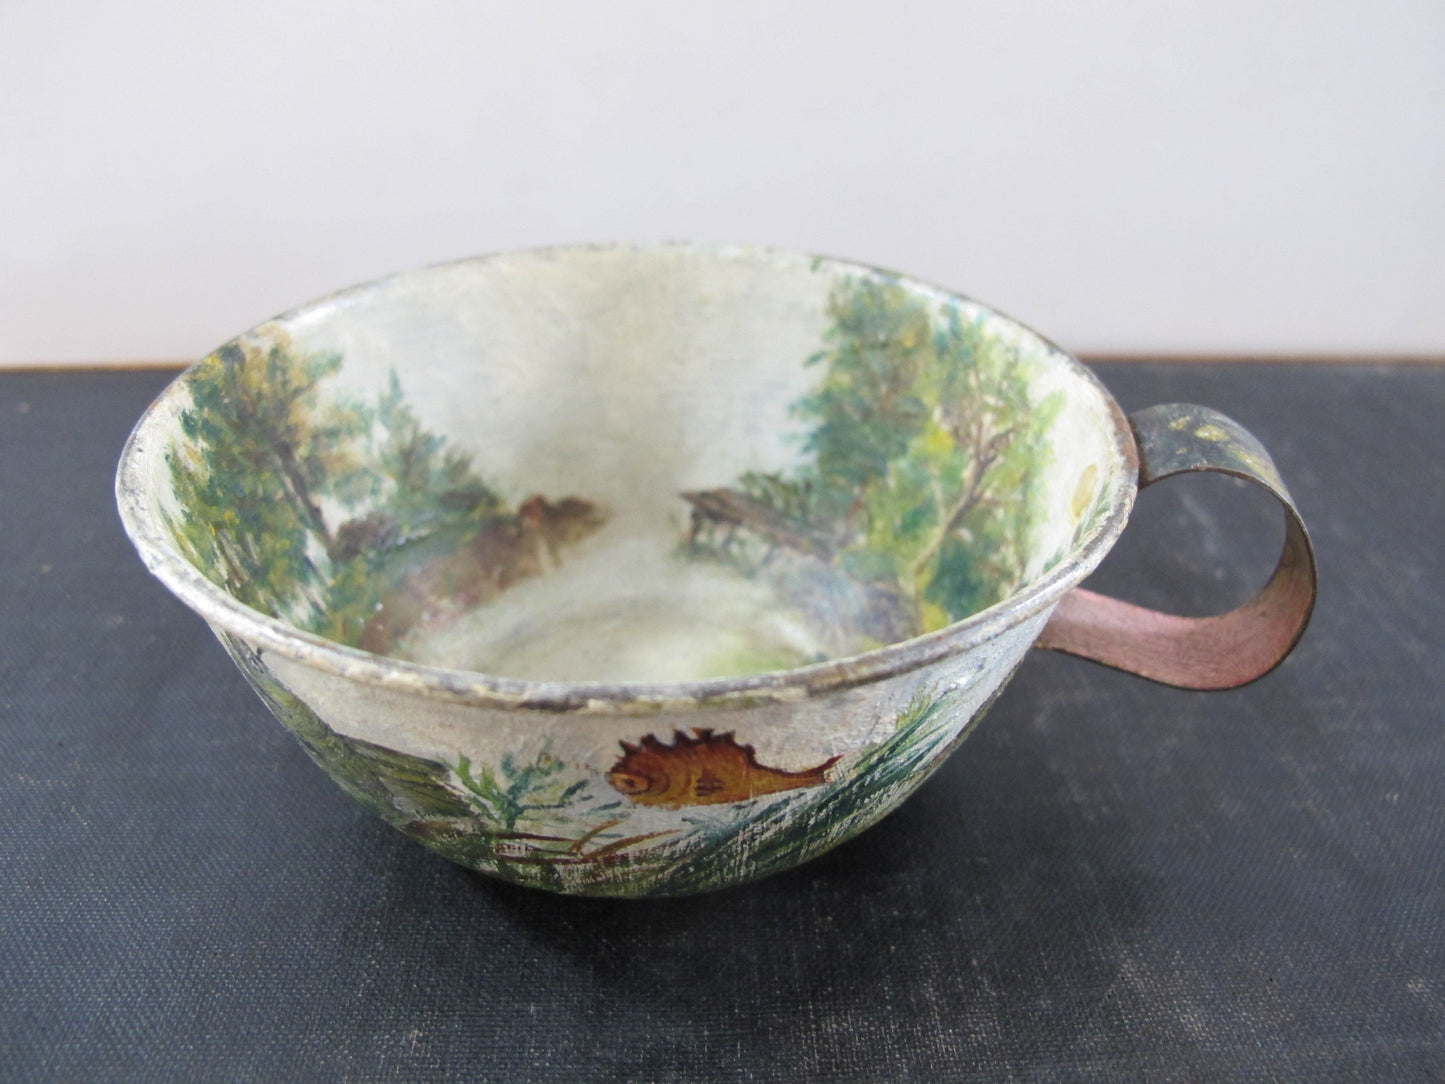 Tole Fishing Teacup Signed Dated 1890s Naive American Folk Art